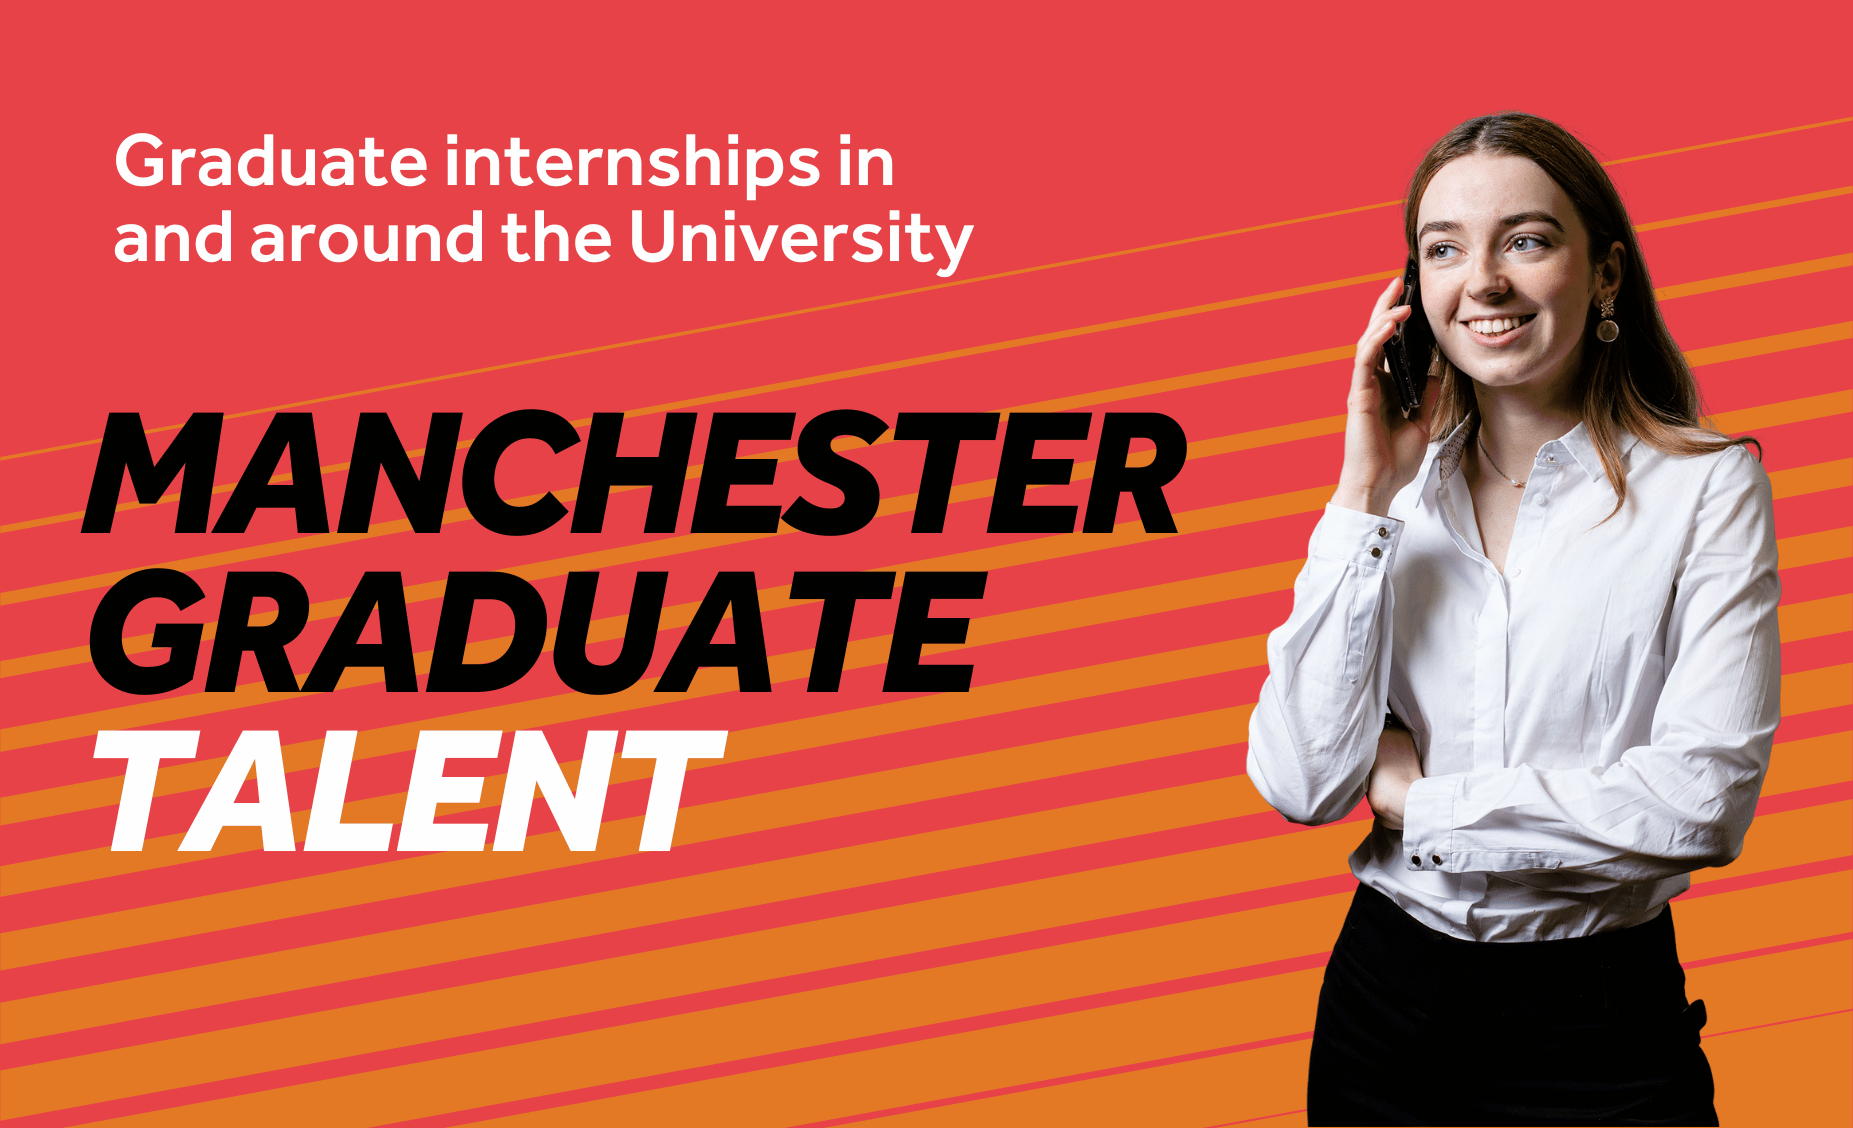 Red background with orange diagonal lines. Image features a student in a white shirt holding a phone to their ear. Text reads: Manchester Graduate Talent, Graduate internships in and around the University.